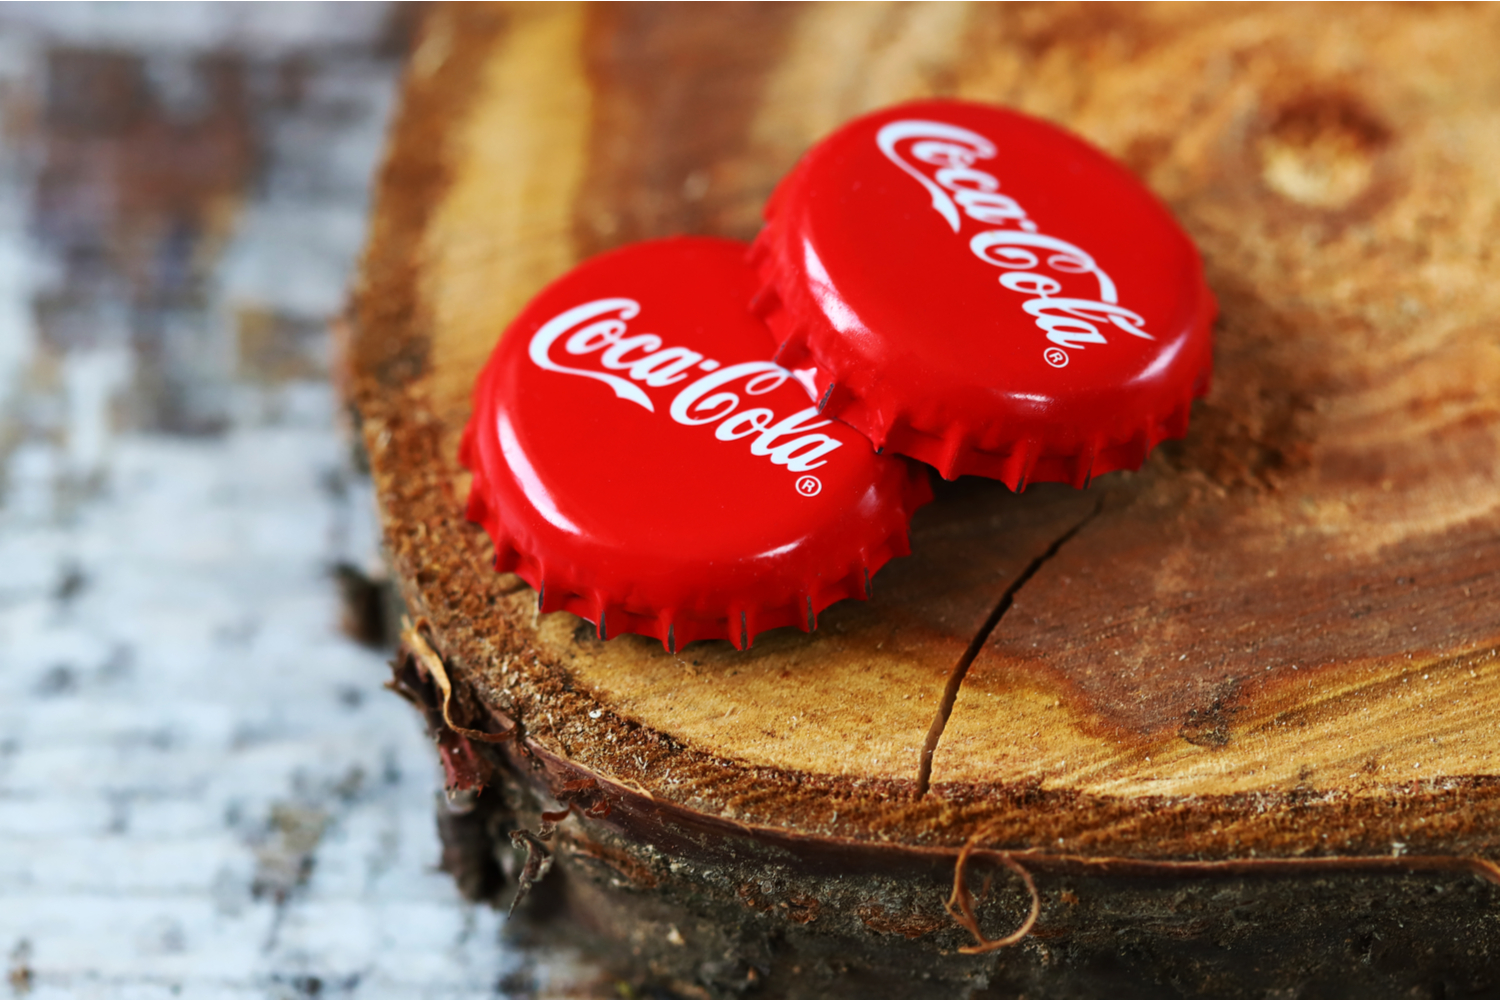 Coca-cola-distributor-offers-bitcoin-payment-options-for-aussie-vending-machines